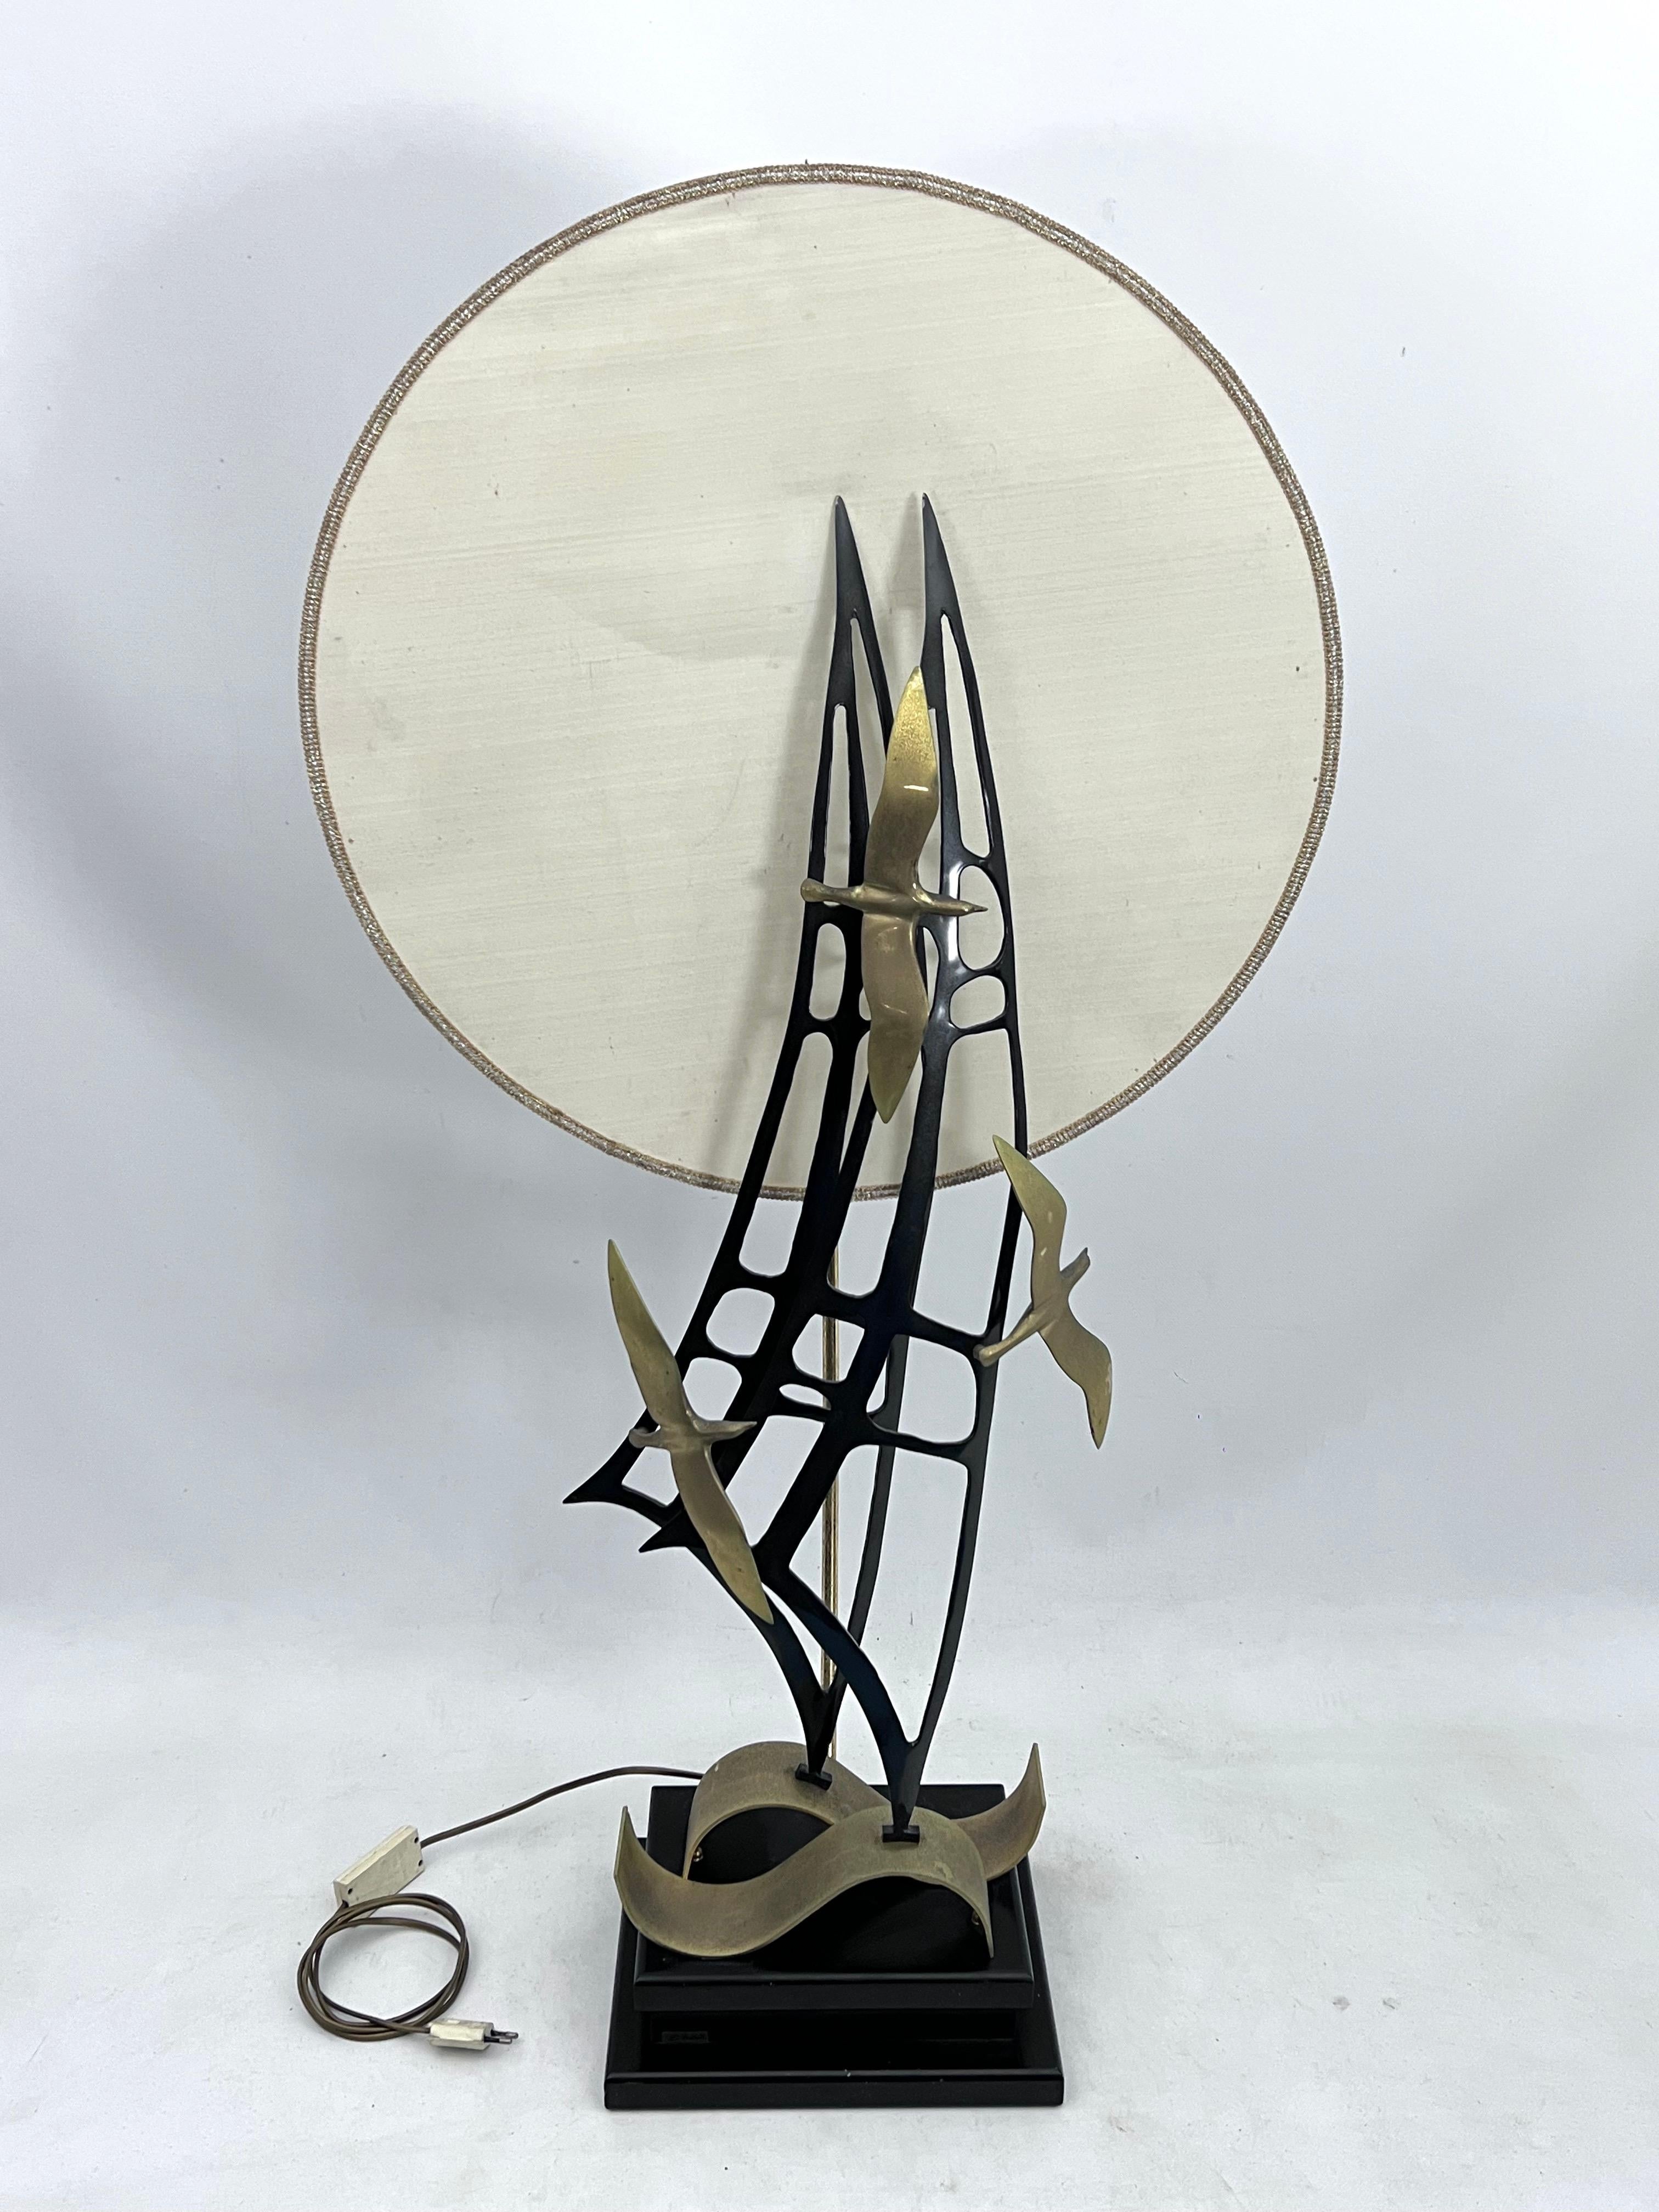 Brass Lanciotto Galeotti, Midcentury Gold-Plated Italian Lamp by L'Originale, 1970s For Sale